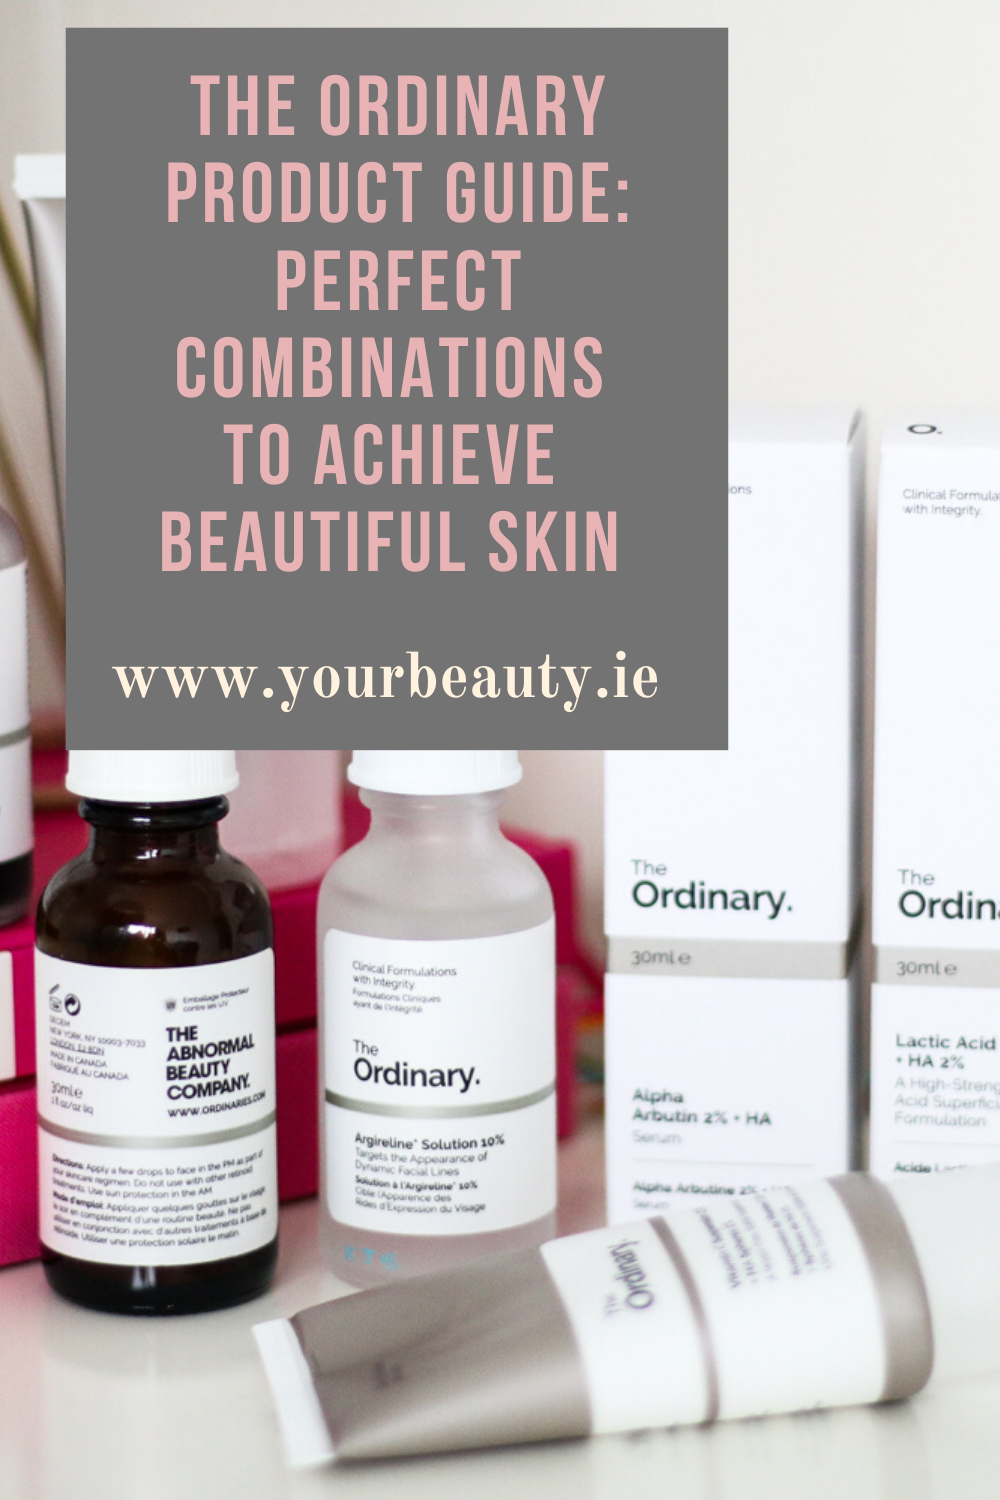 Deciem The Ordinary Product Guide and Review